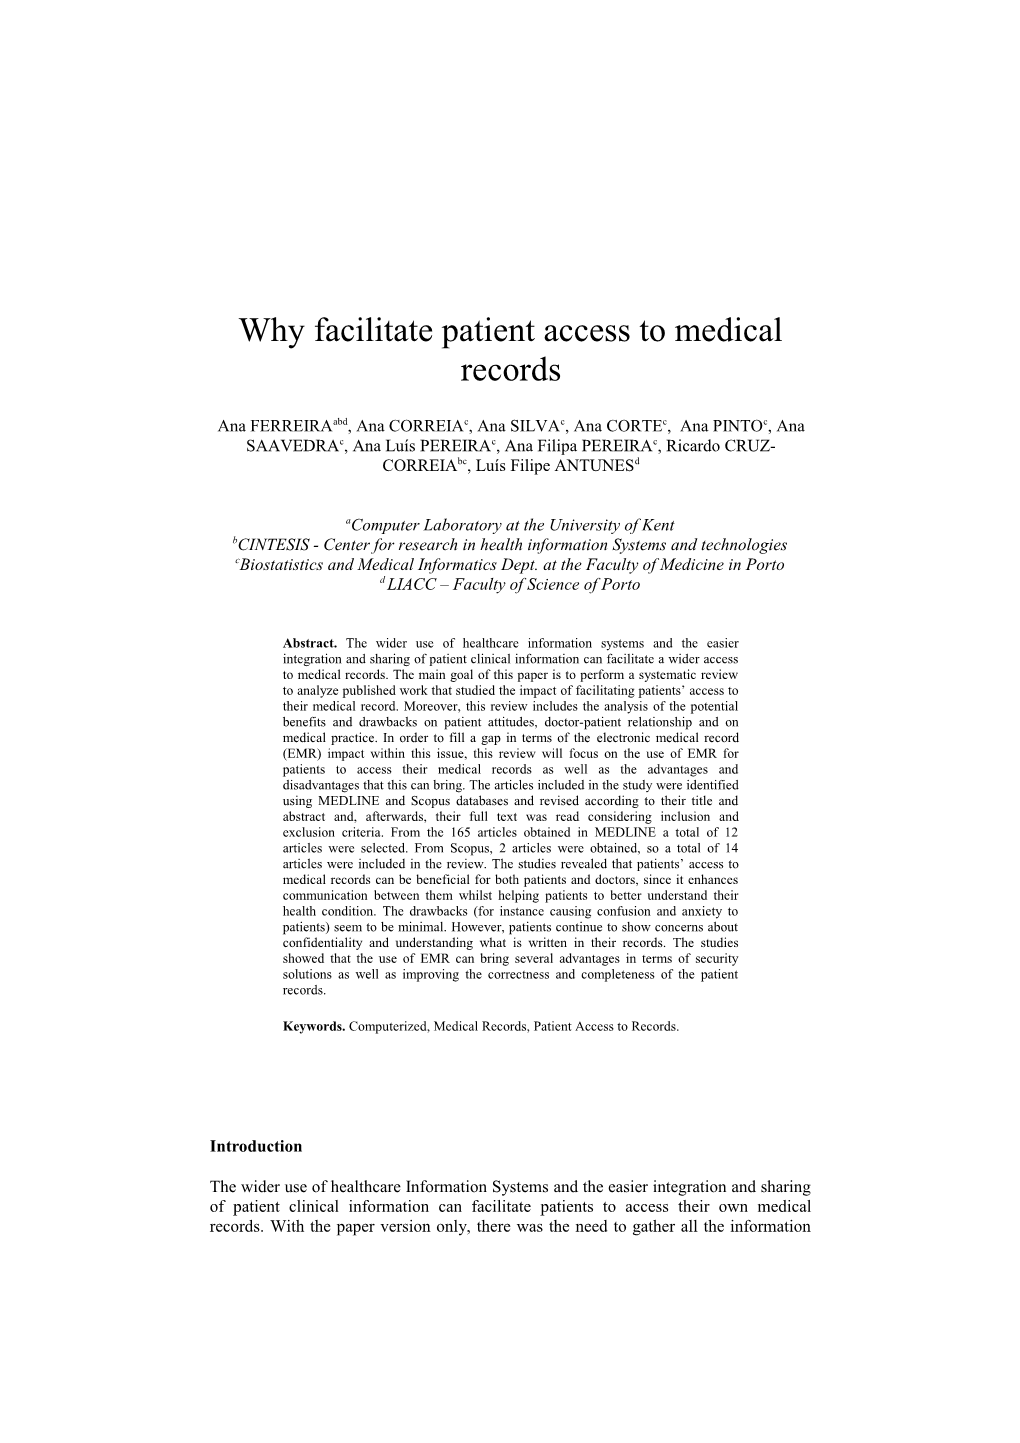 Why Facilitate Patient Access to Medical Records